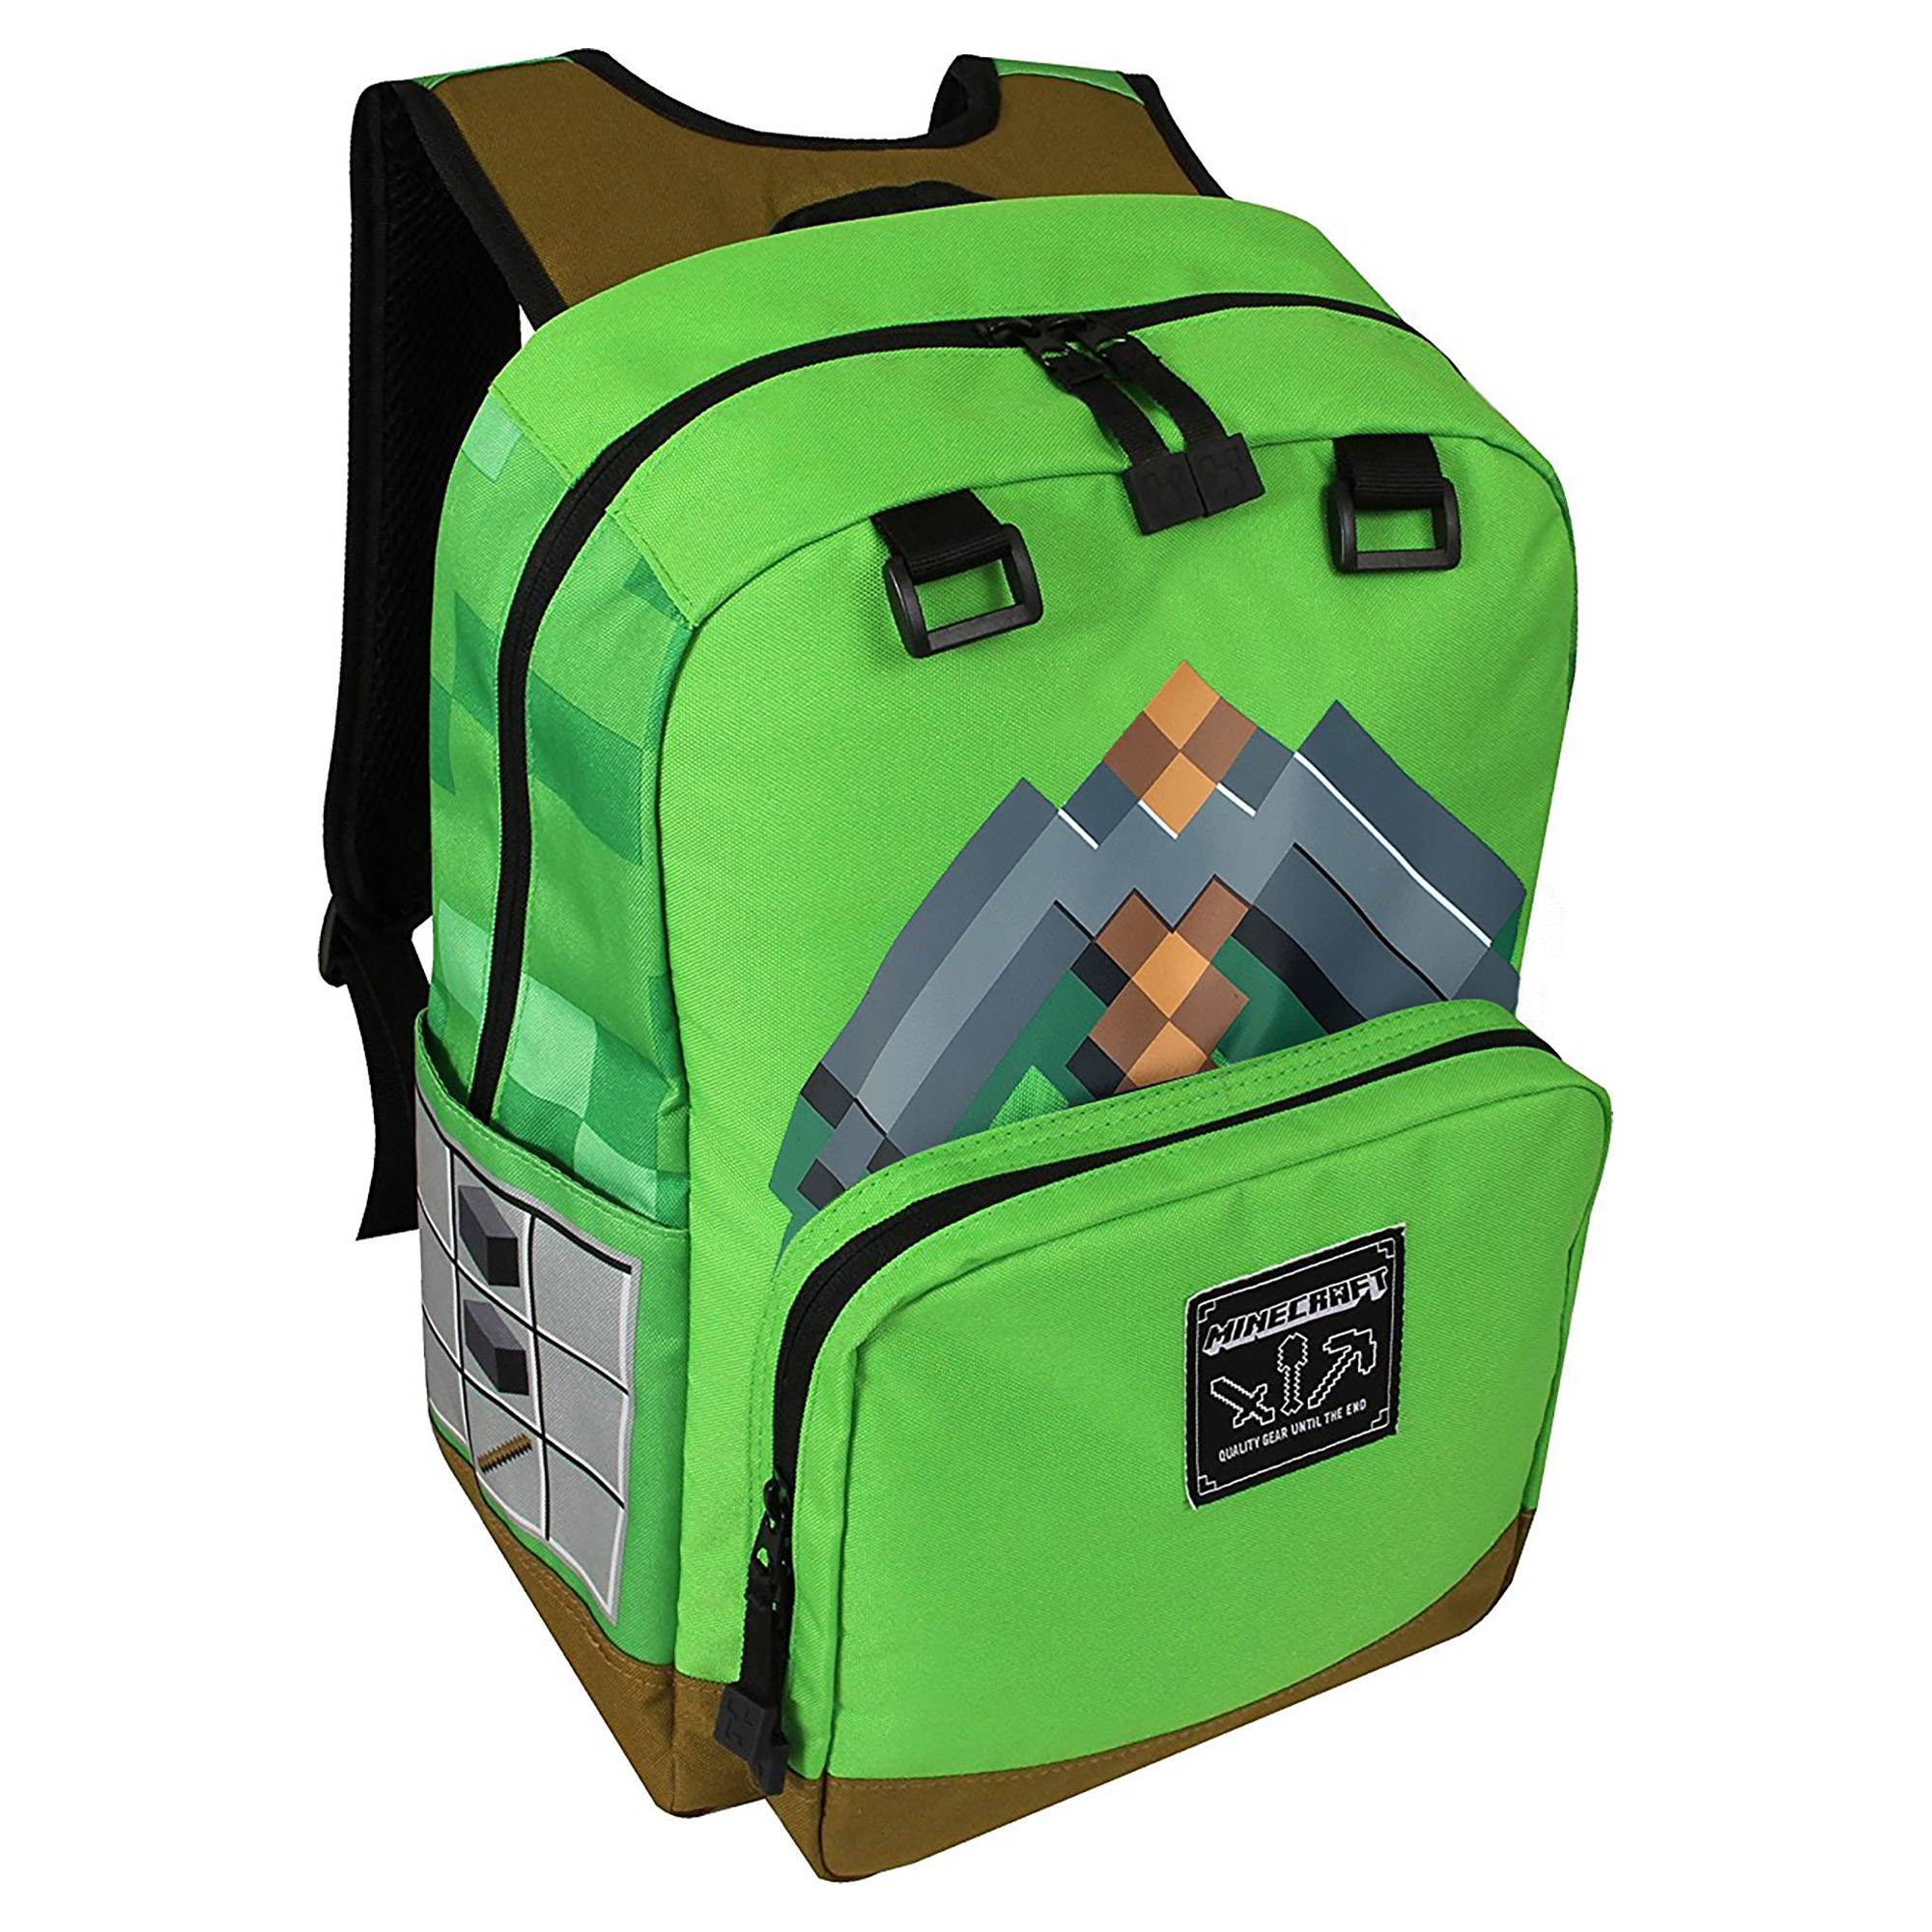 wearable adventer backpack mod minecraft 1.12.2